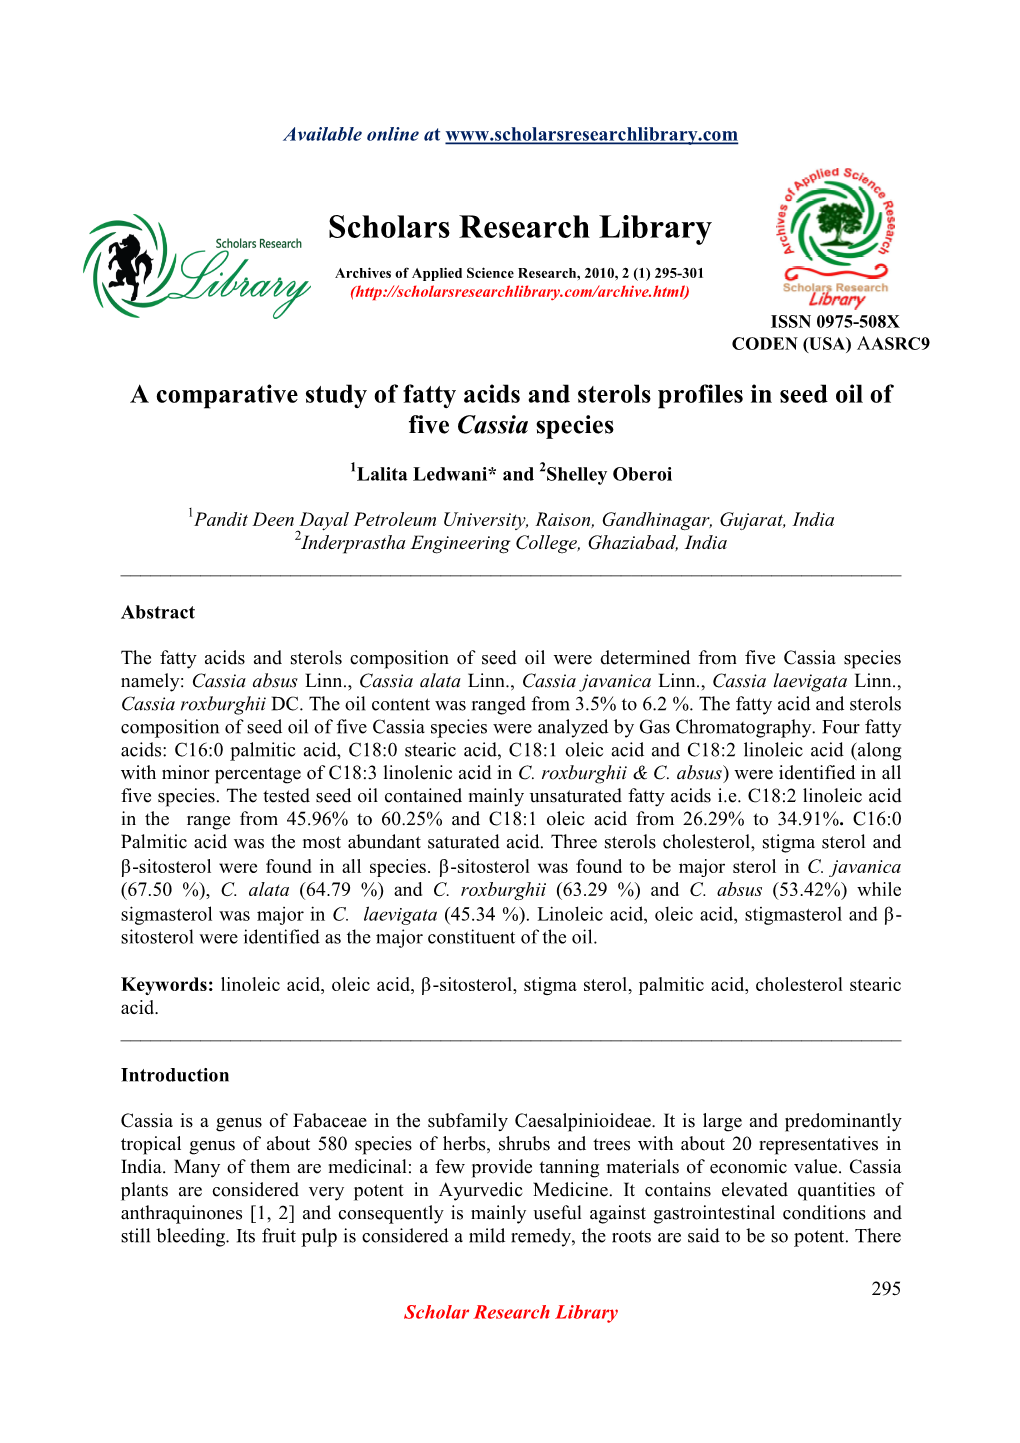 A Comparative Study of Fatty Acids and Sterols Profiles in Seed Oil of Five Cassia Species